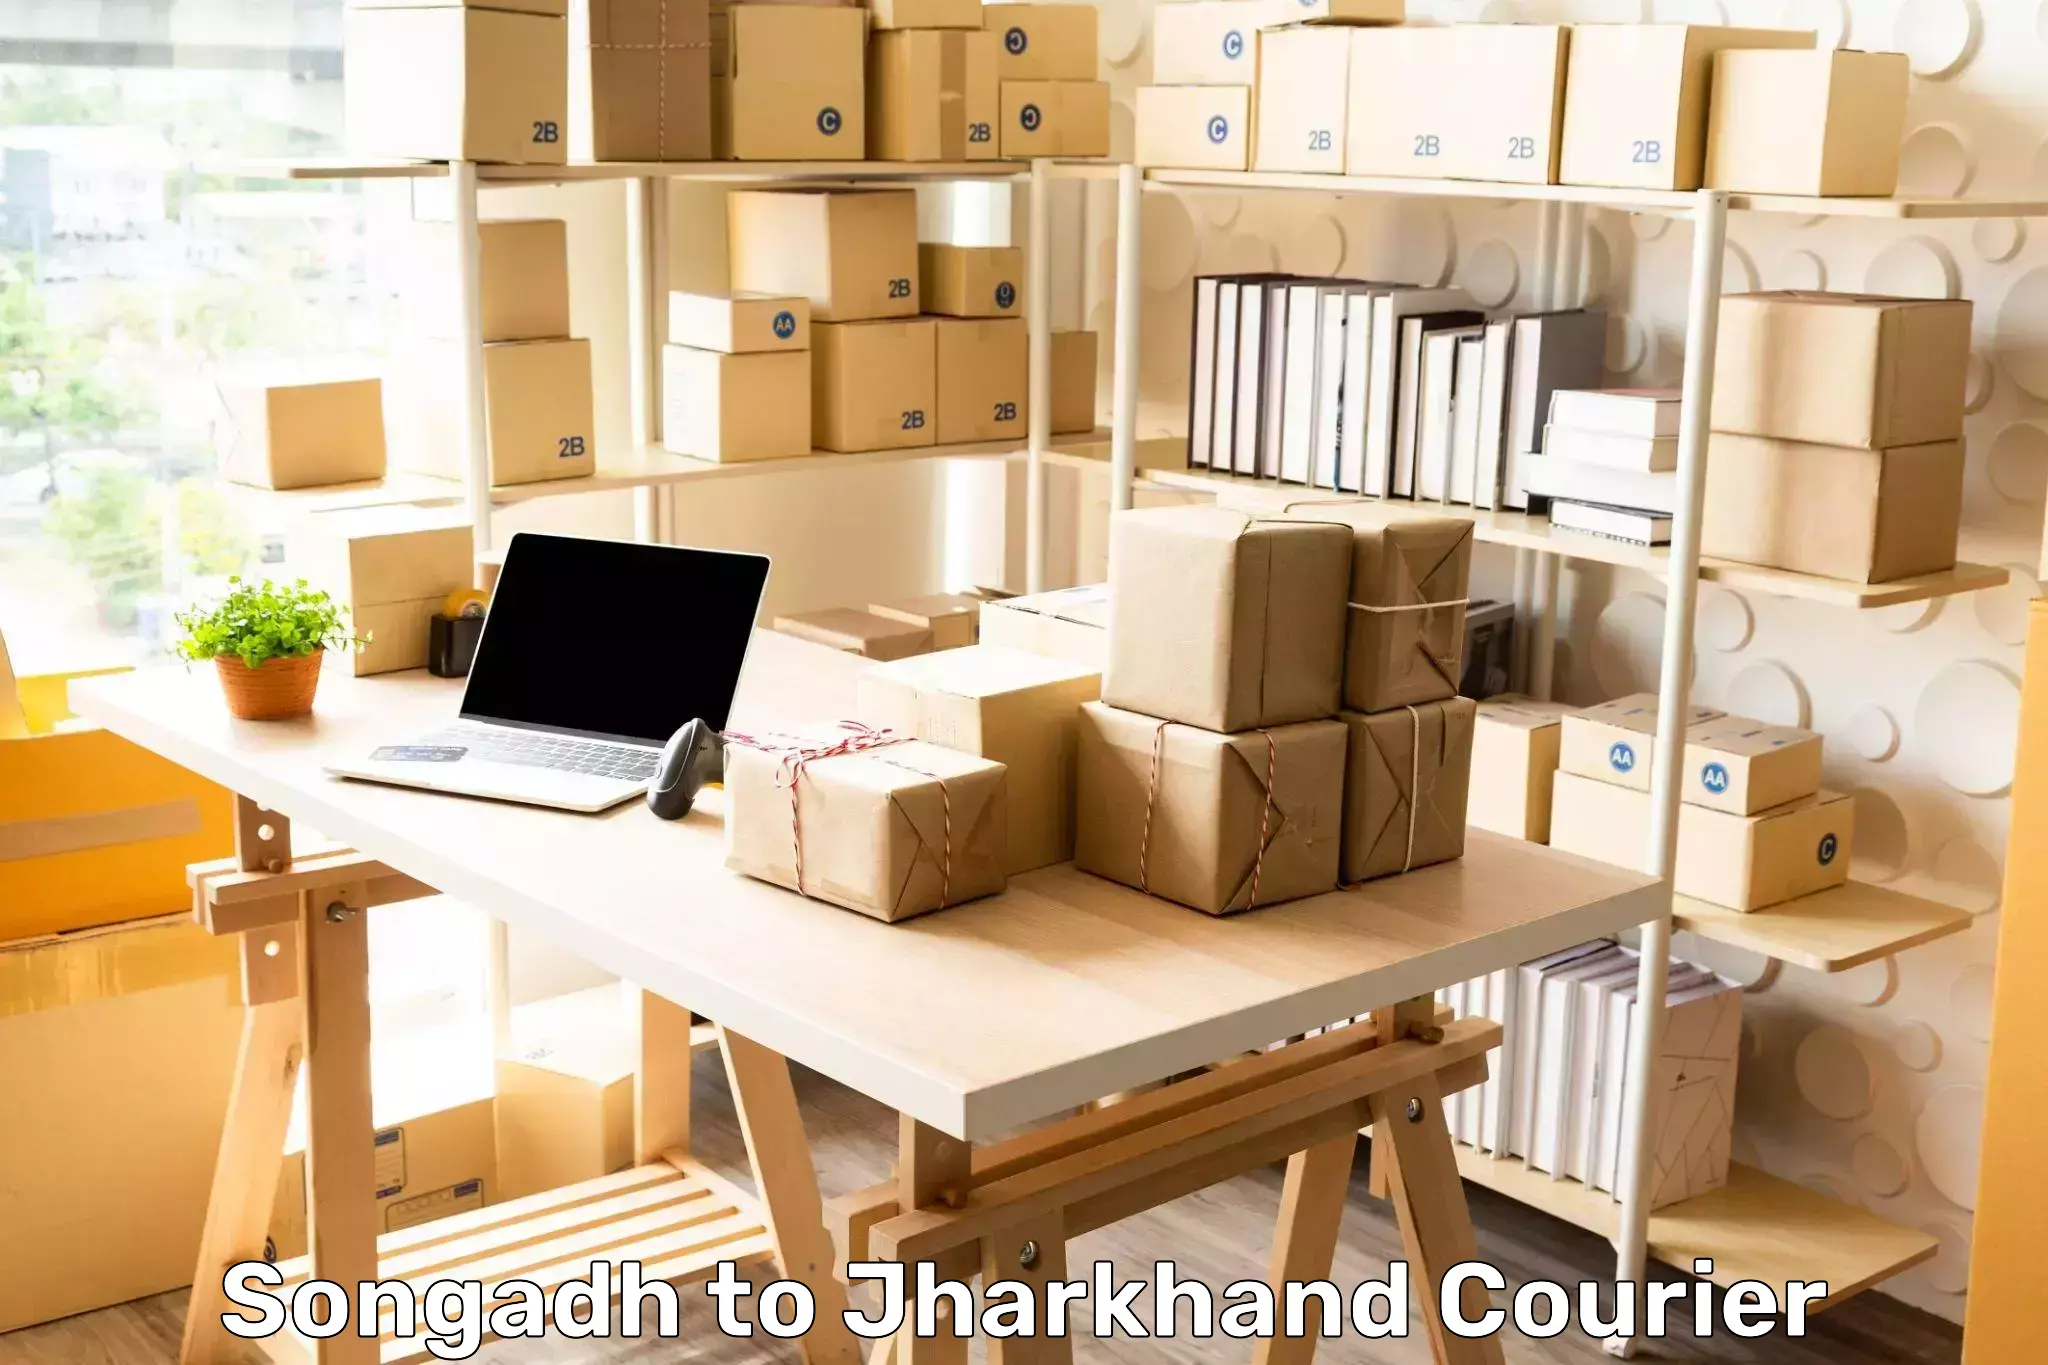 Domestic courier Songadh to Jharkhand